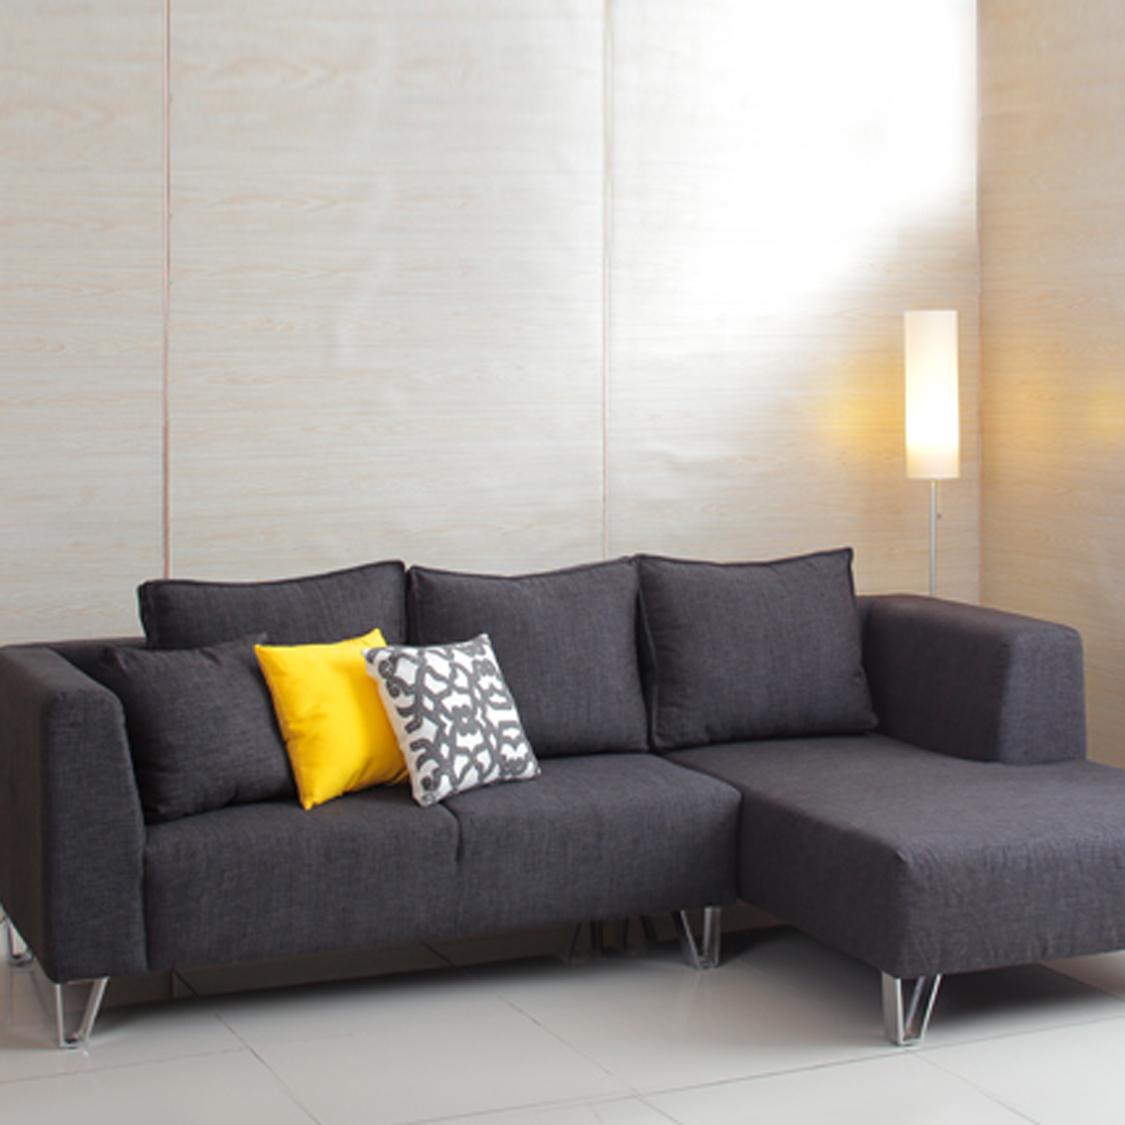 Sm Home On Twitter Cholo Sectional Sofa Now At Lower Price